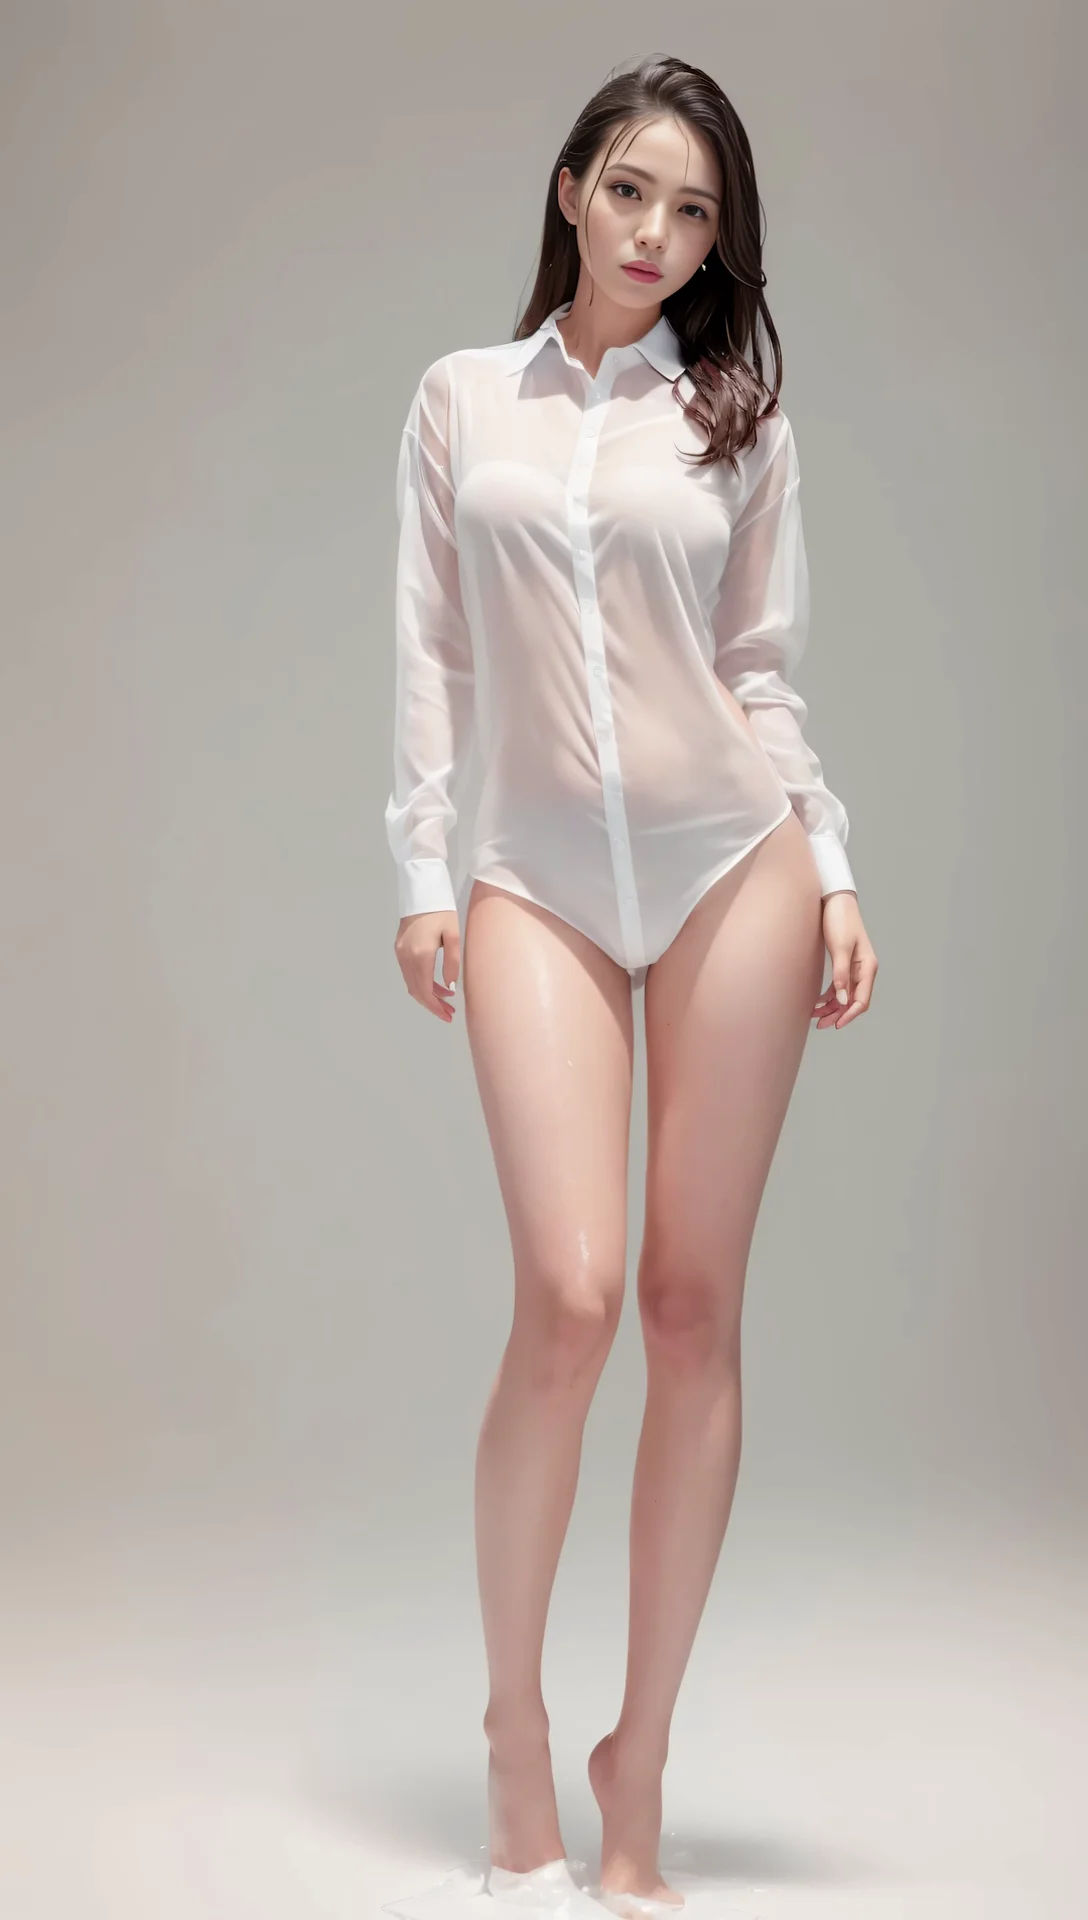 Ai Lookbook Beautiful Girl In A White Shirt And Panties Image 08